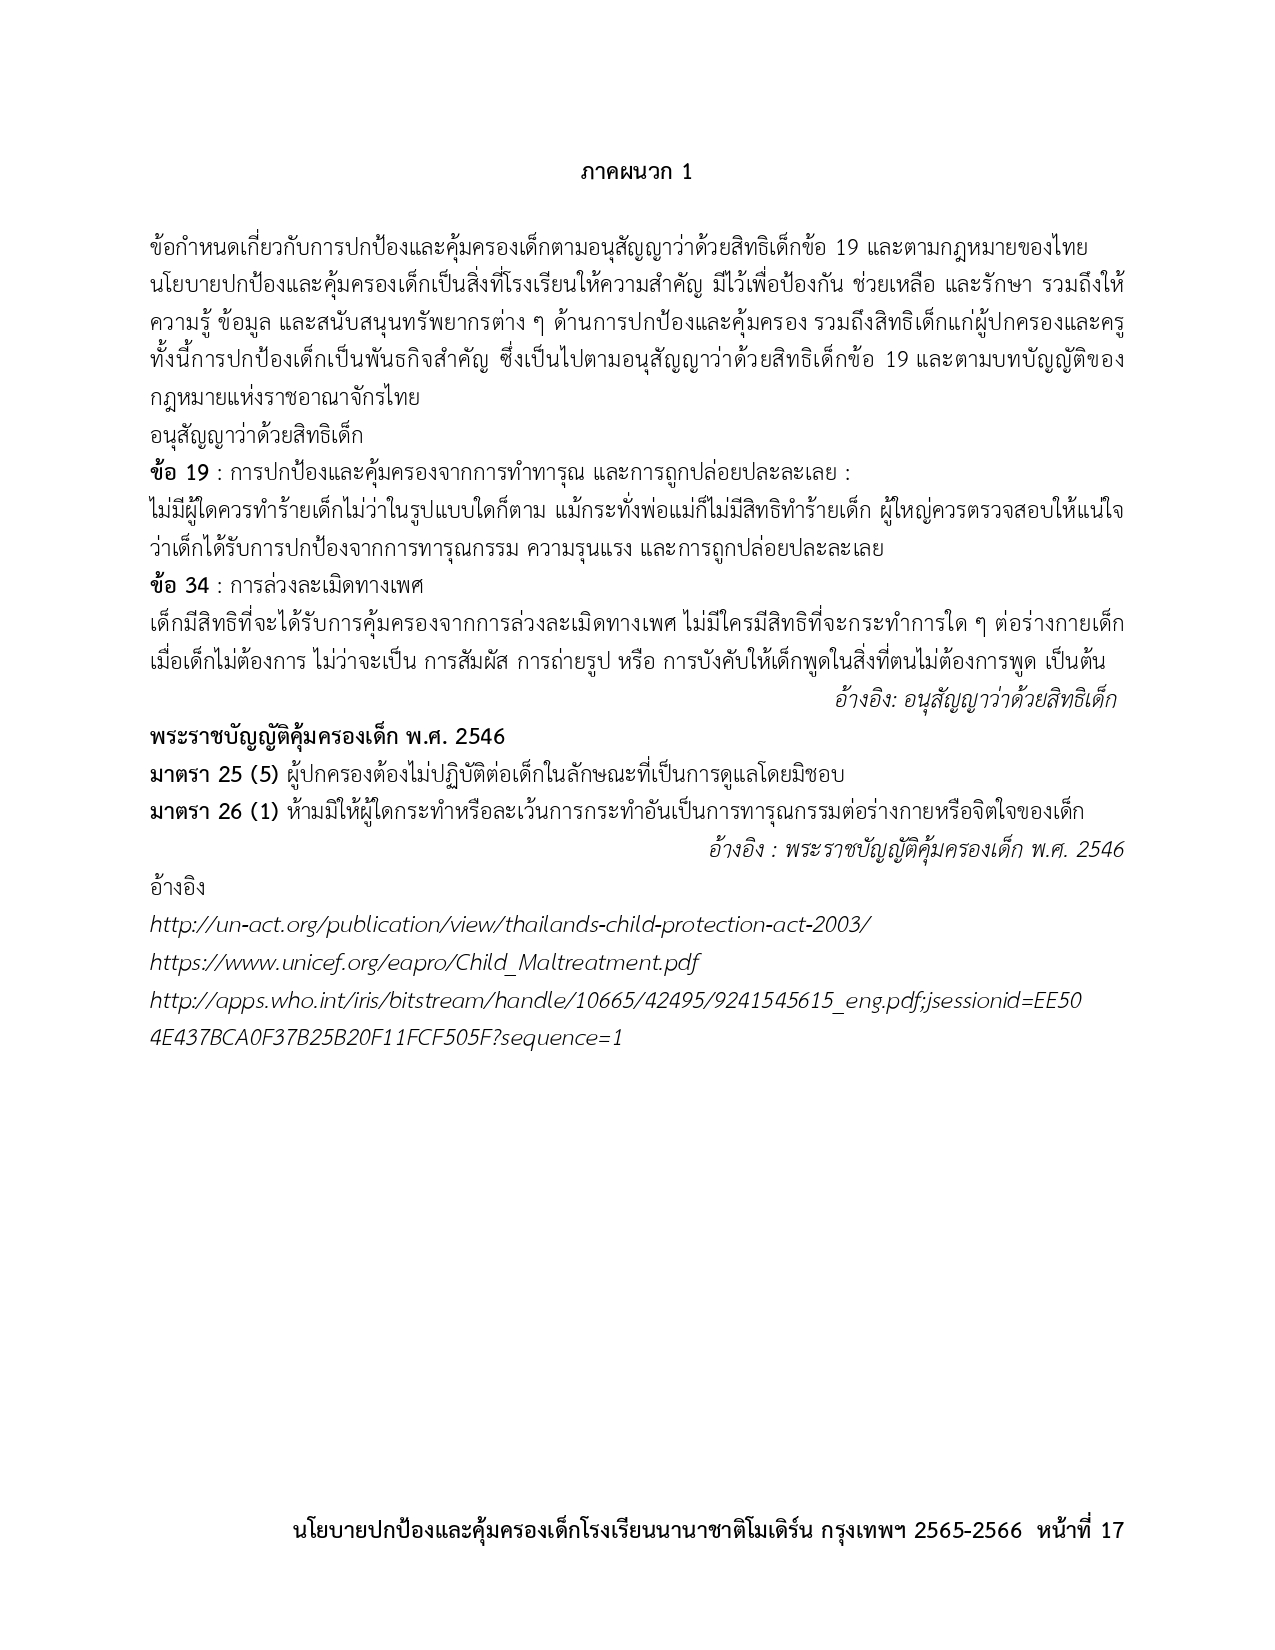 Child Protection Policy Thai Version page 0017